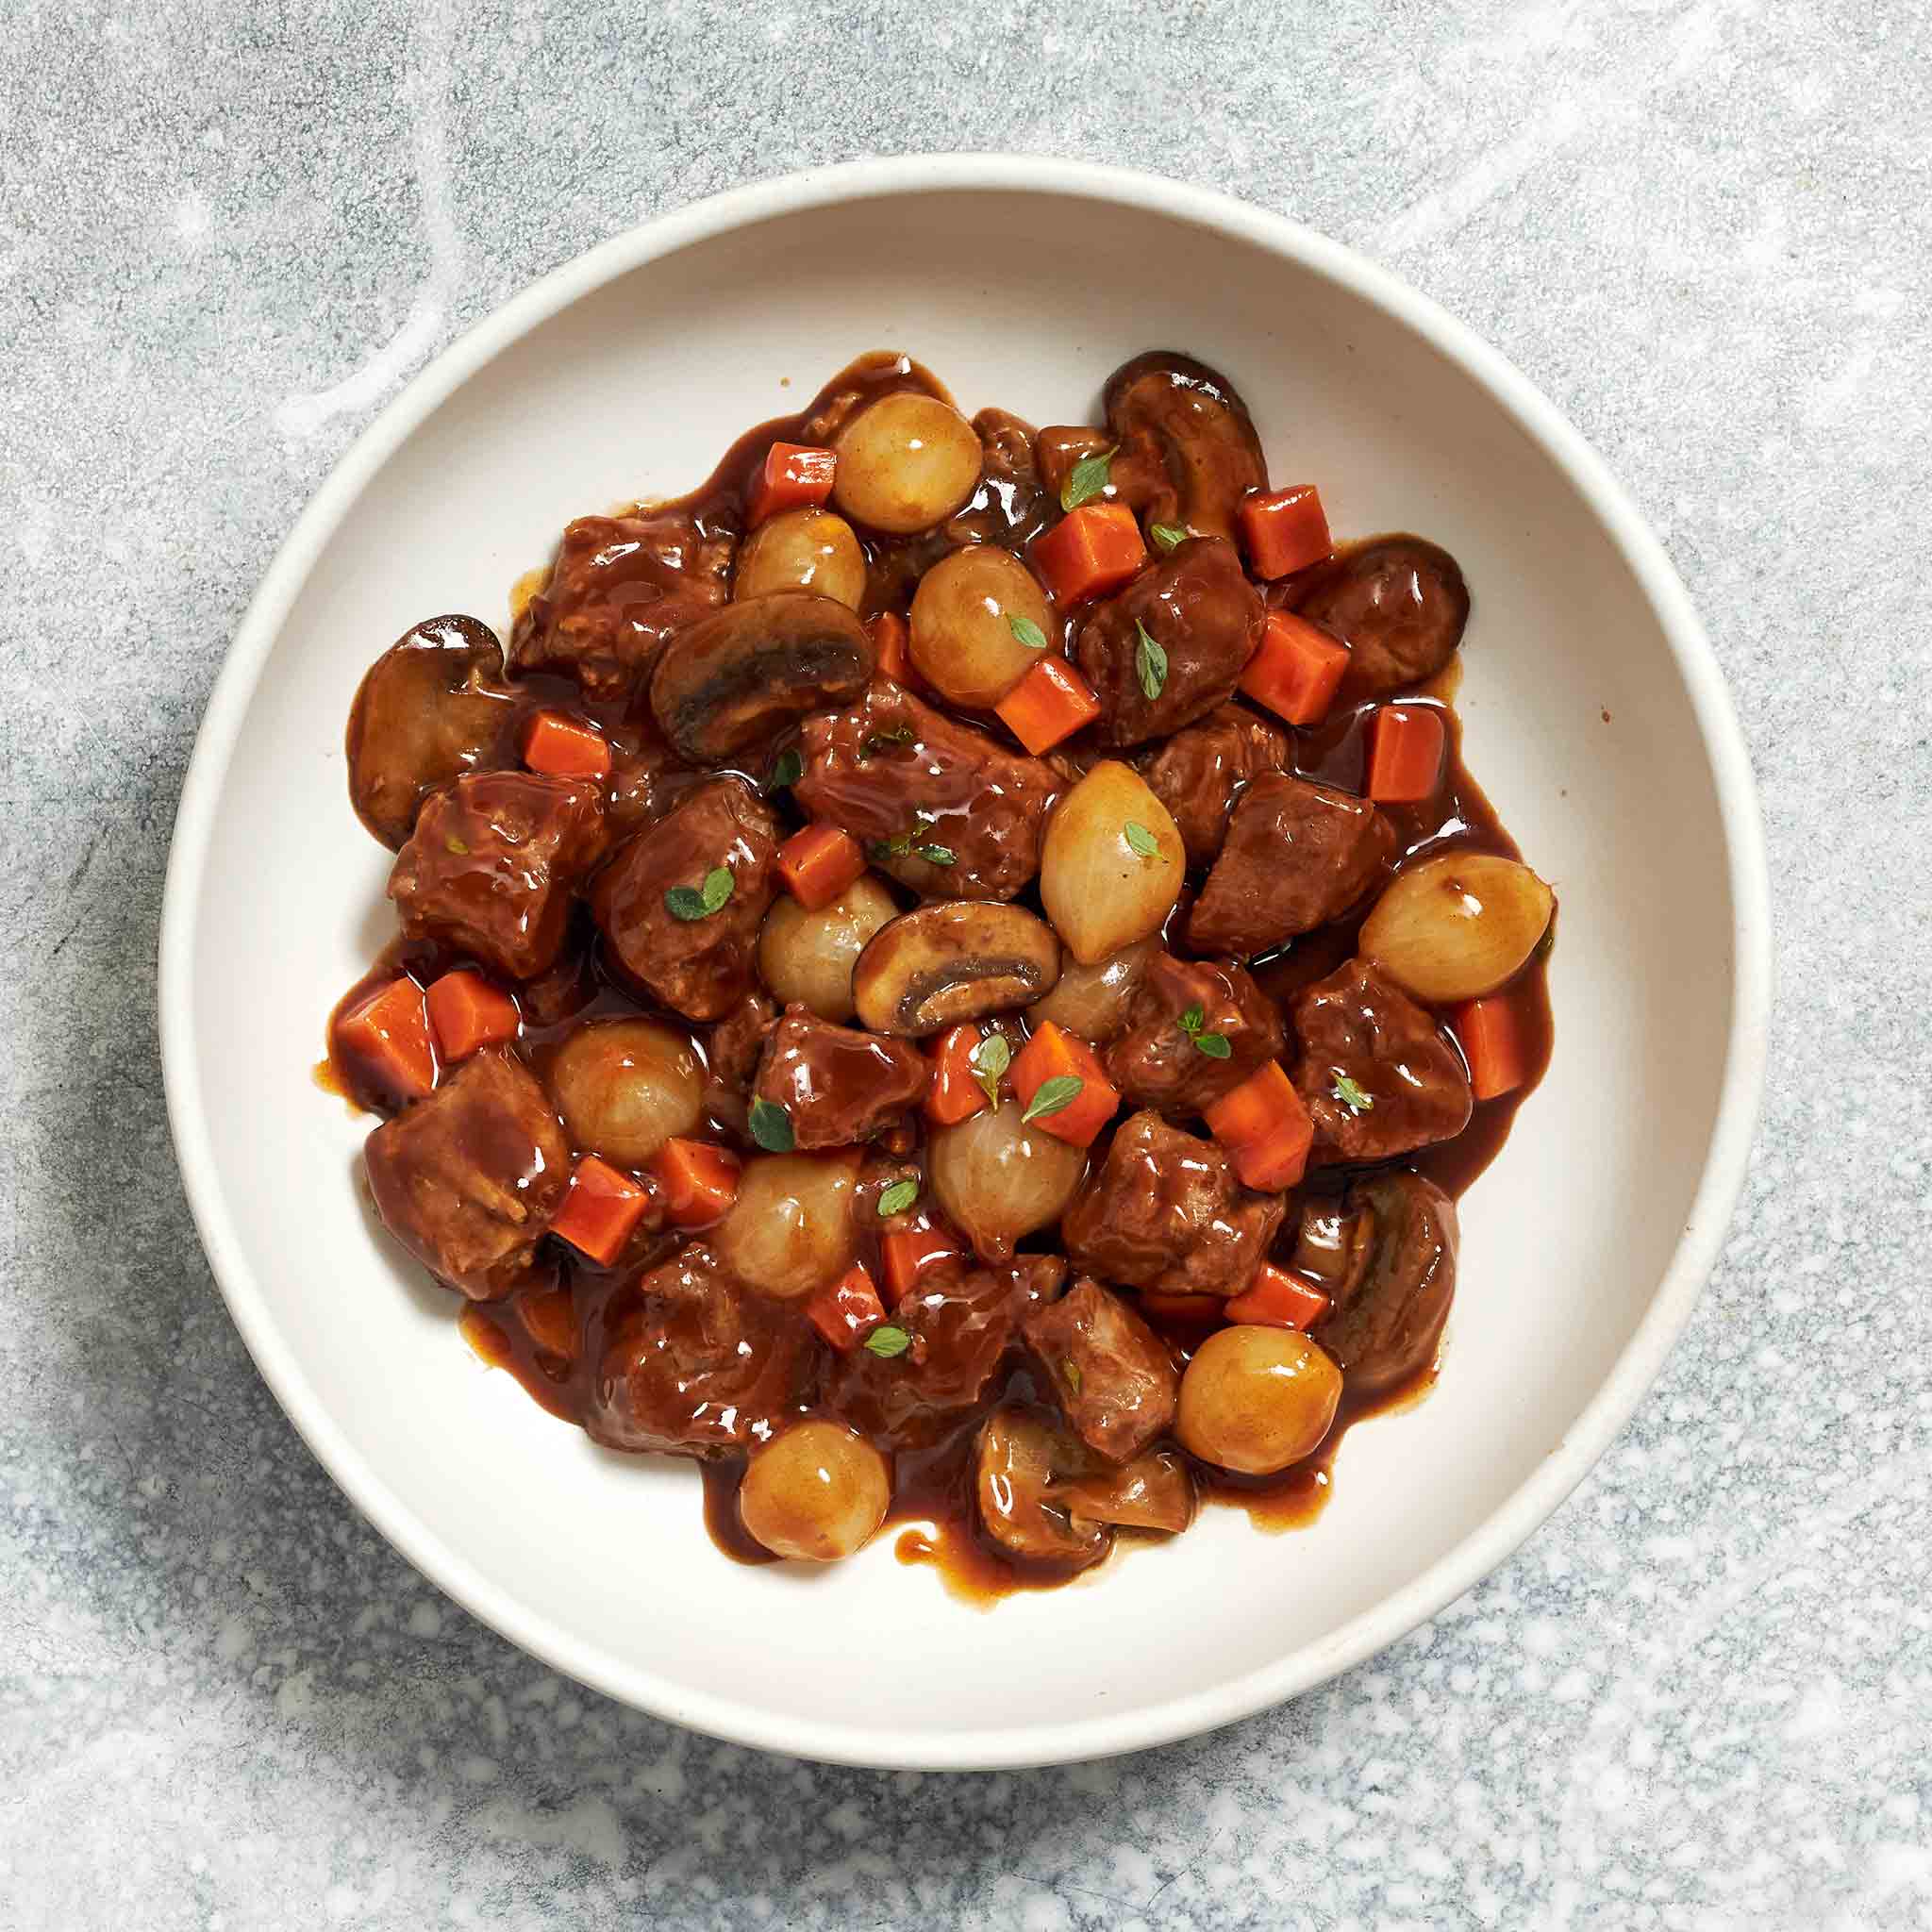 8061 WF PLATED Beef Bourguignon 16oz READY MEALS